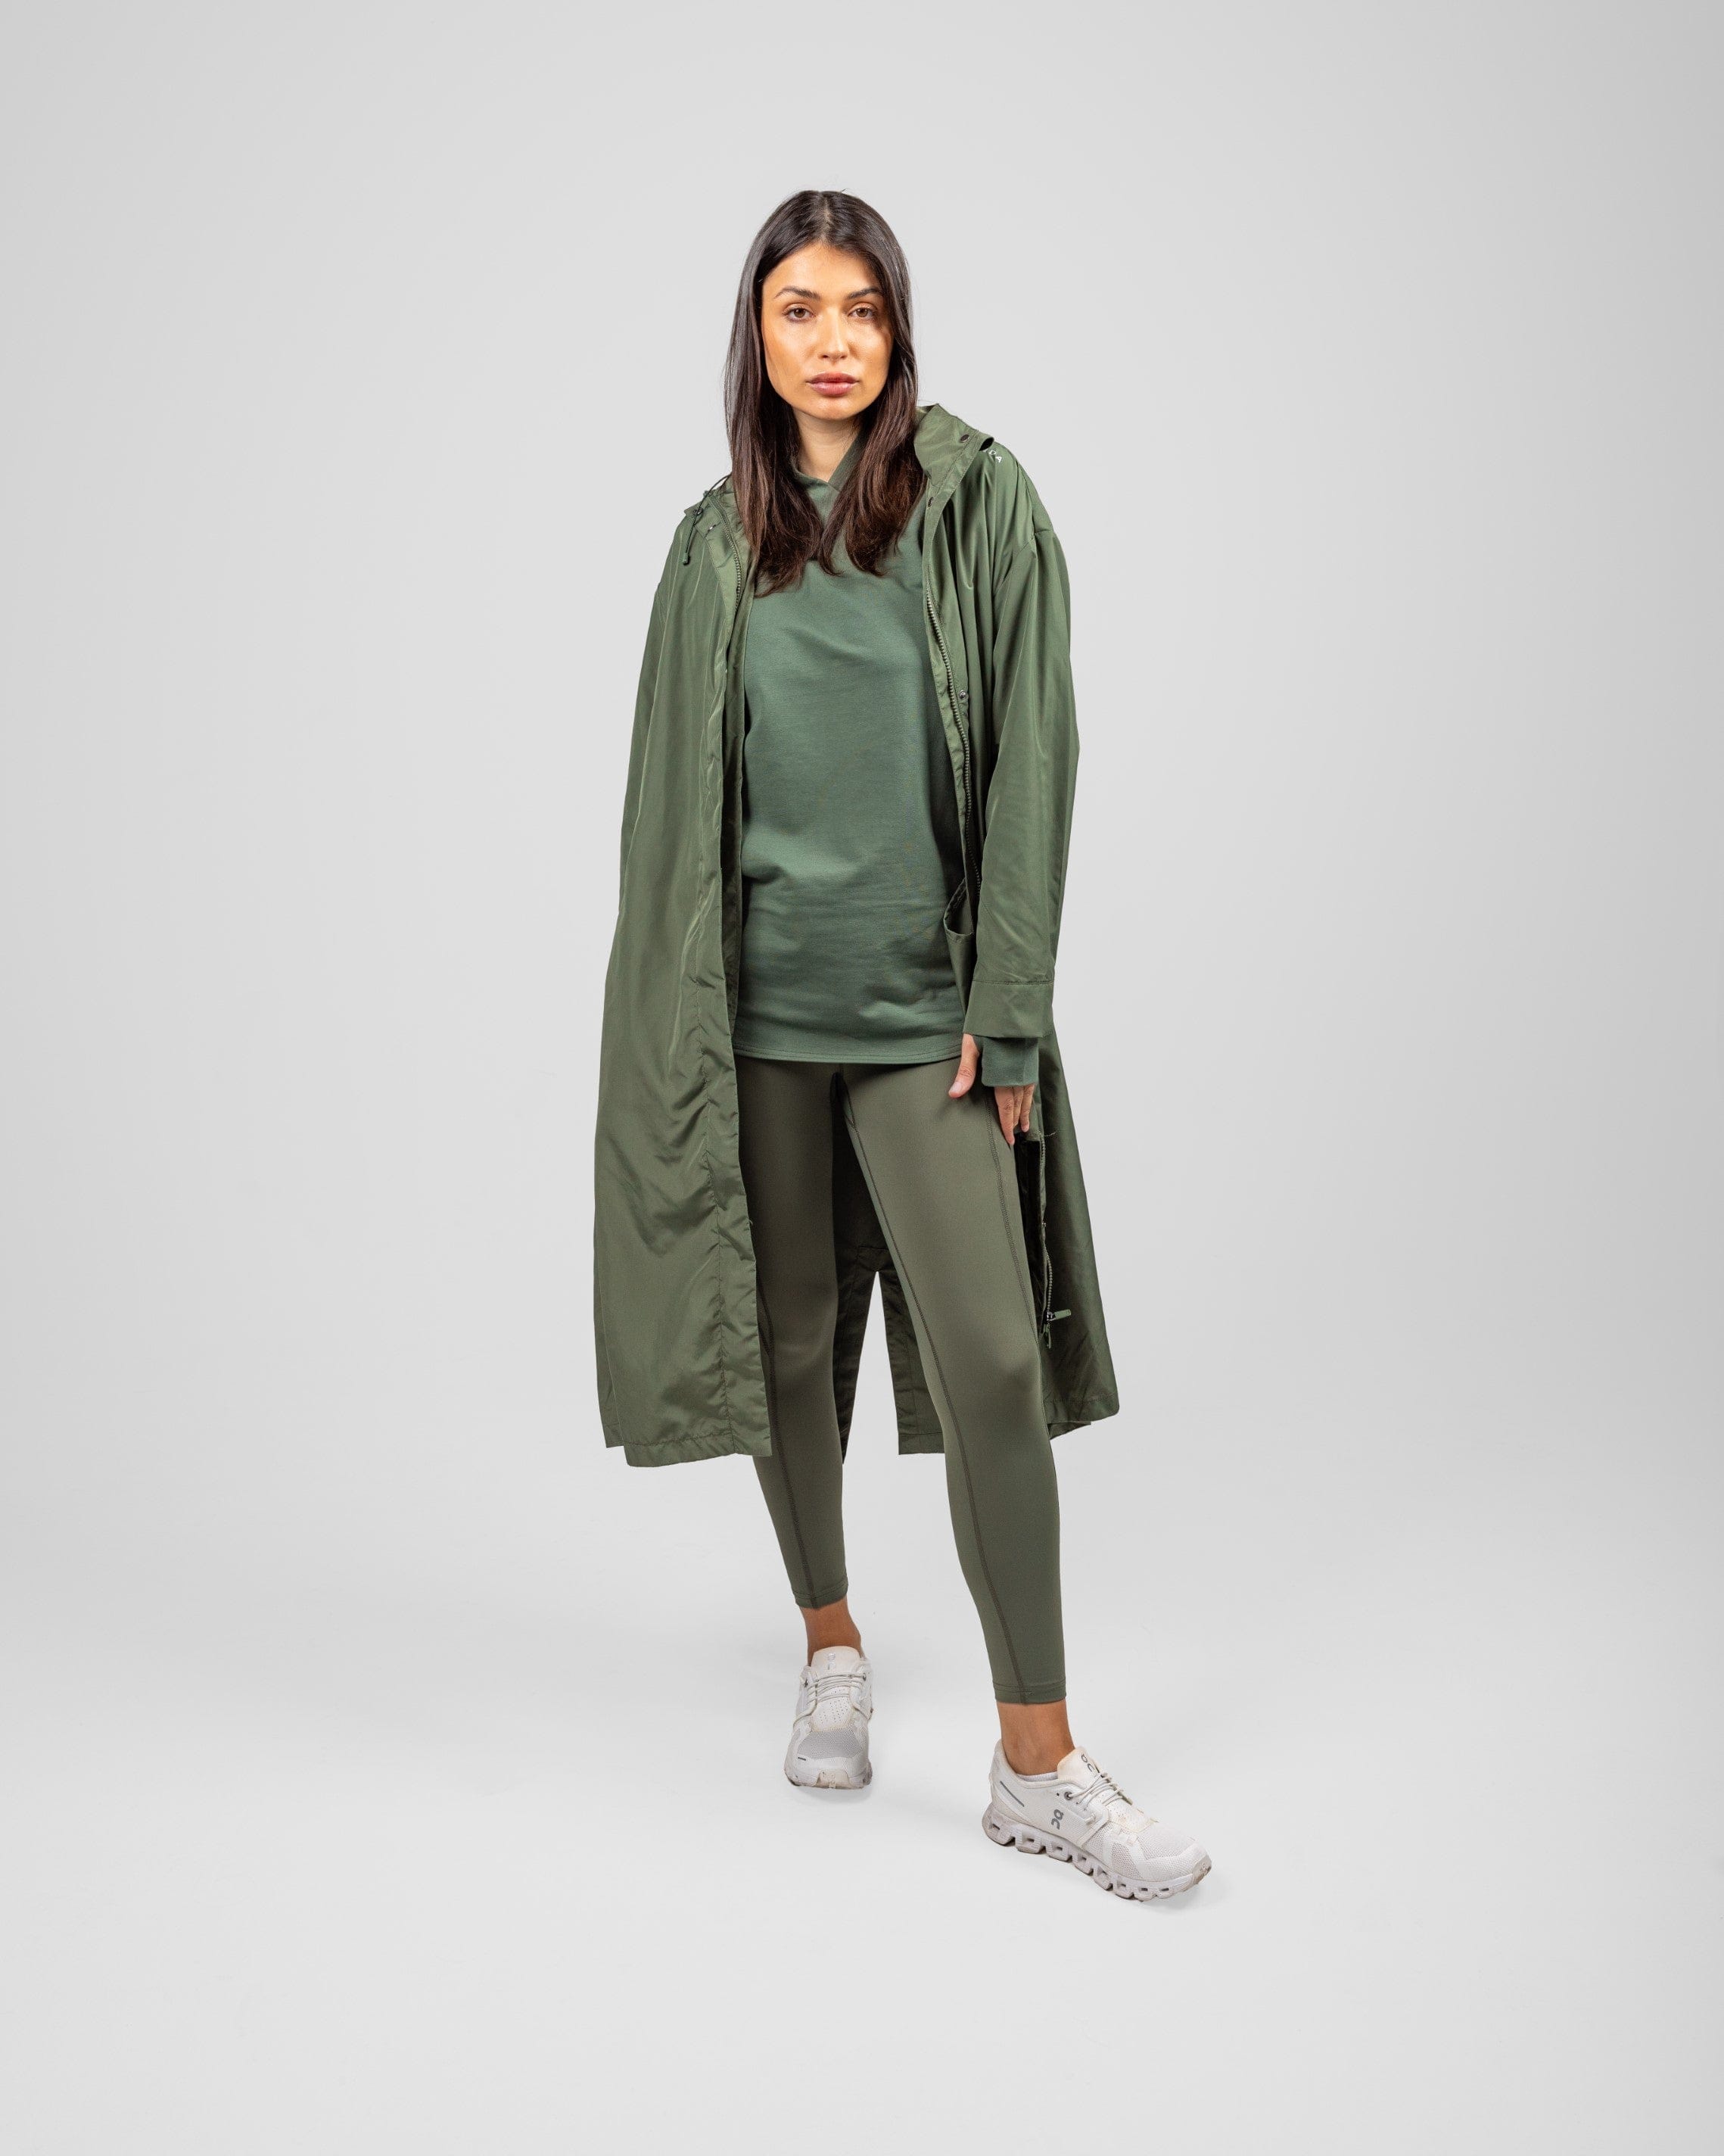 A model in an Olive MAK LIGHT PARKA by Qynda made of lightweight fabric and leggings, posing, standing against a light gray background.